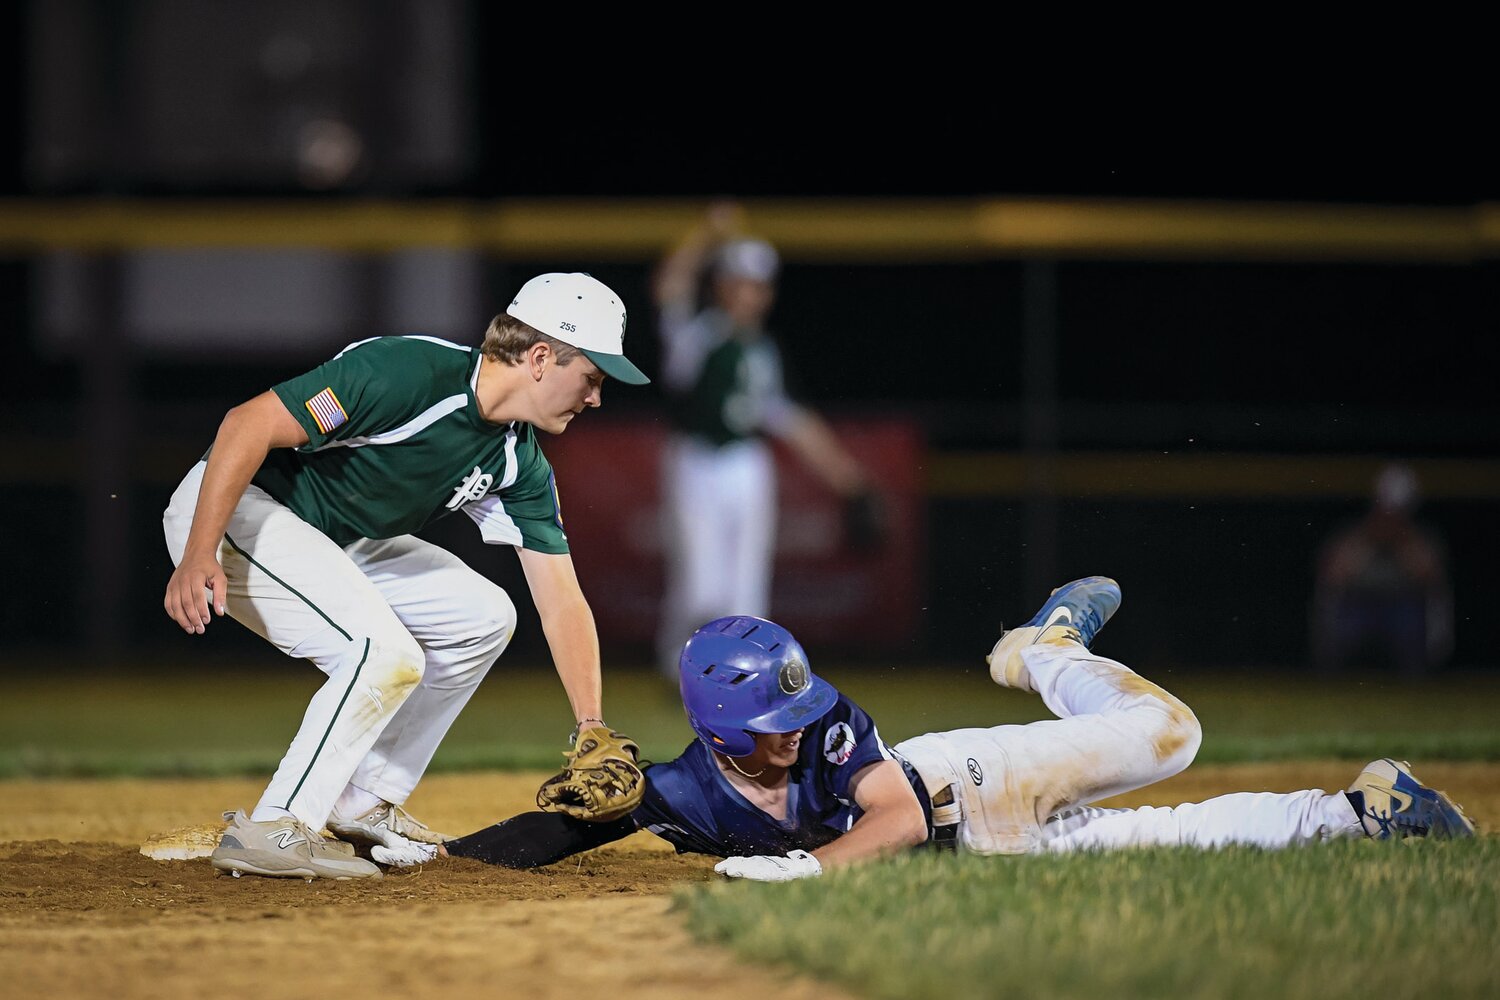 Pennridge’s second baseman Garrett Navitsky tags out Quakertown’s Brayden Schuler after trying to steal in the top of the sixth inning.